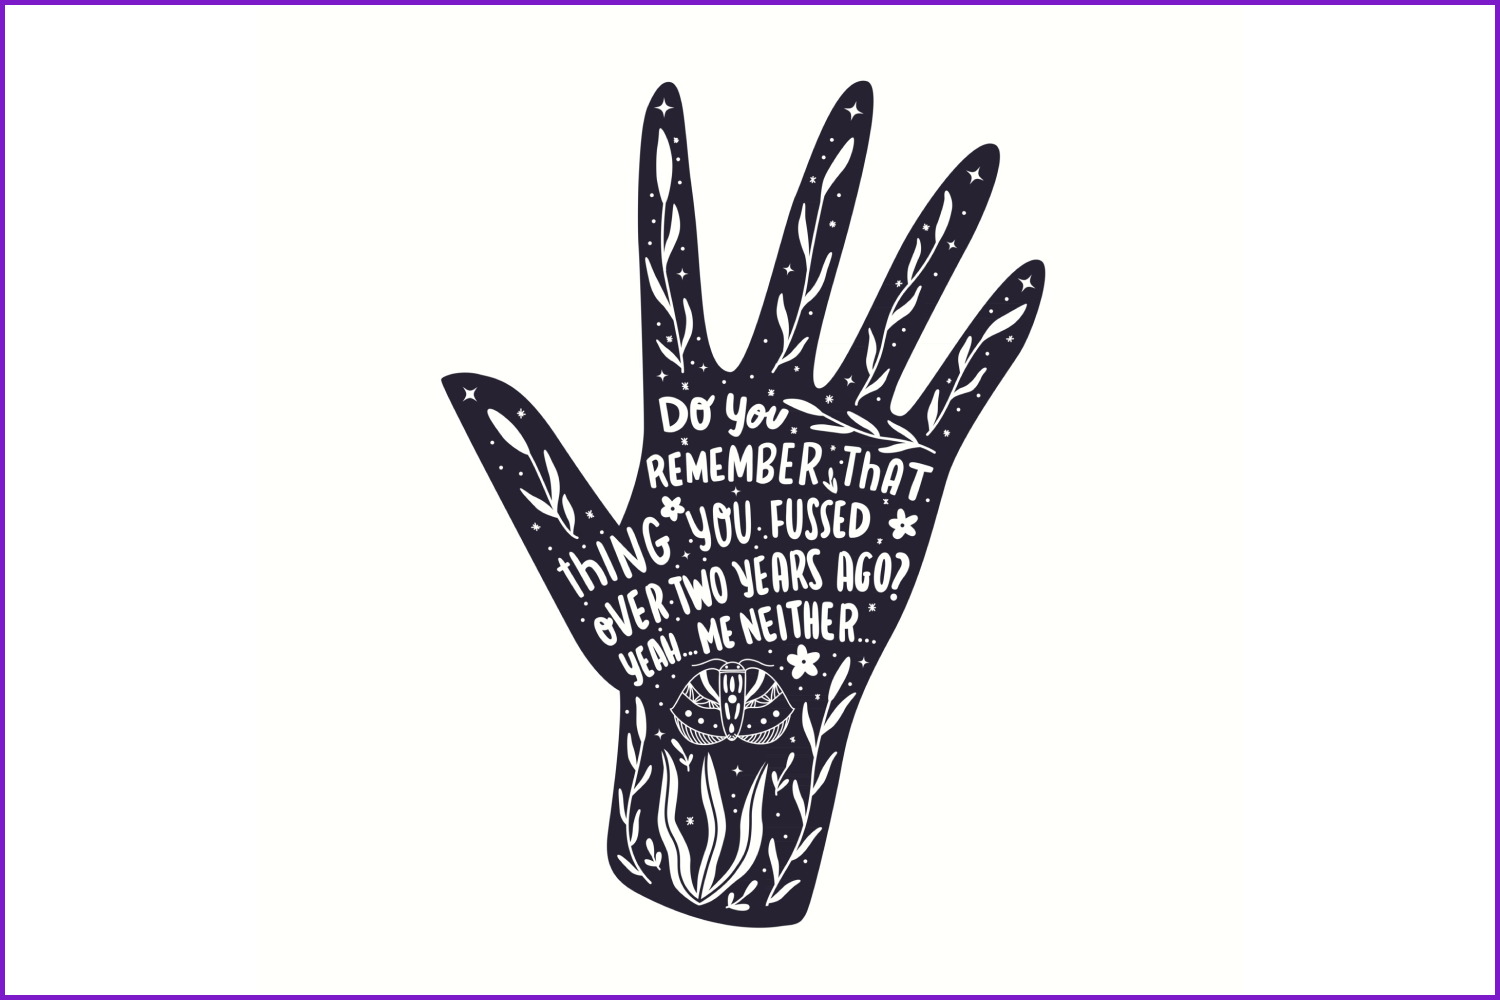 Drawn black hand with text and drawings in it.